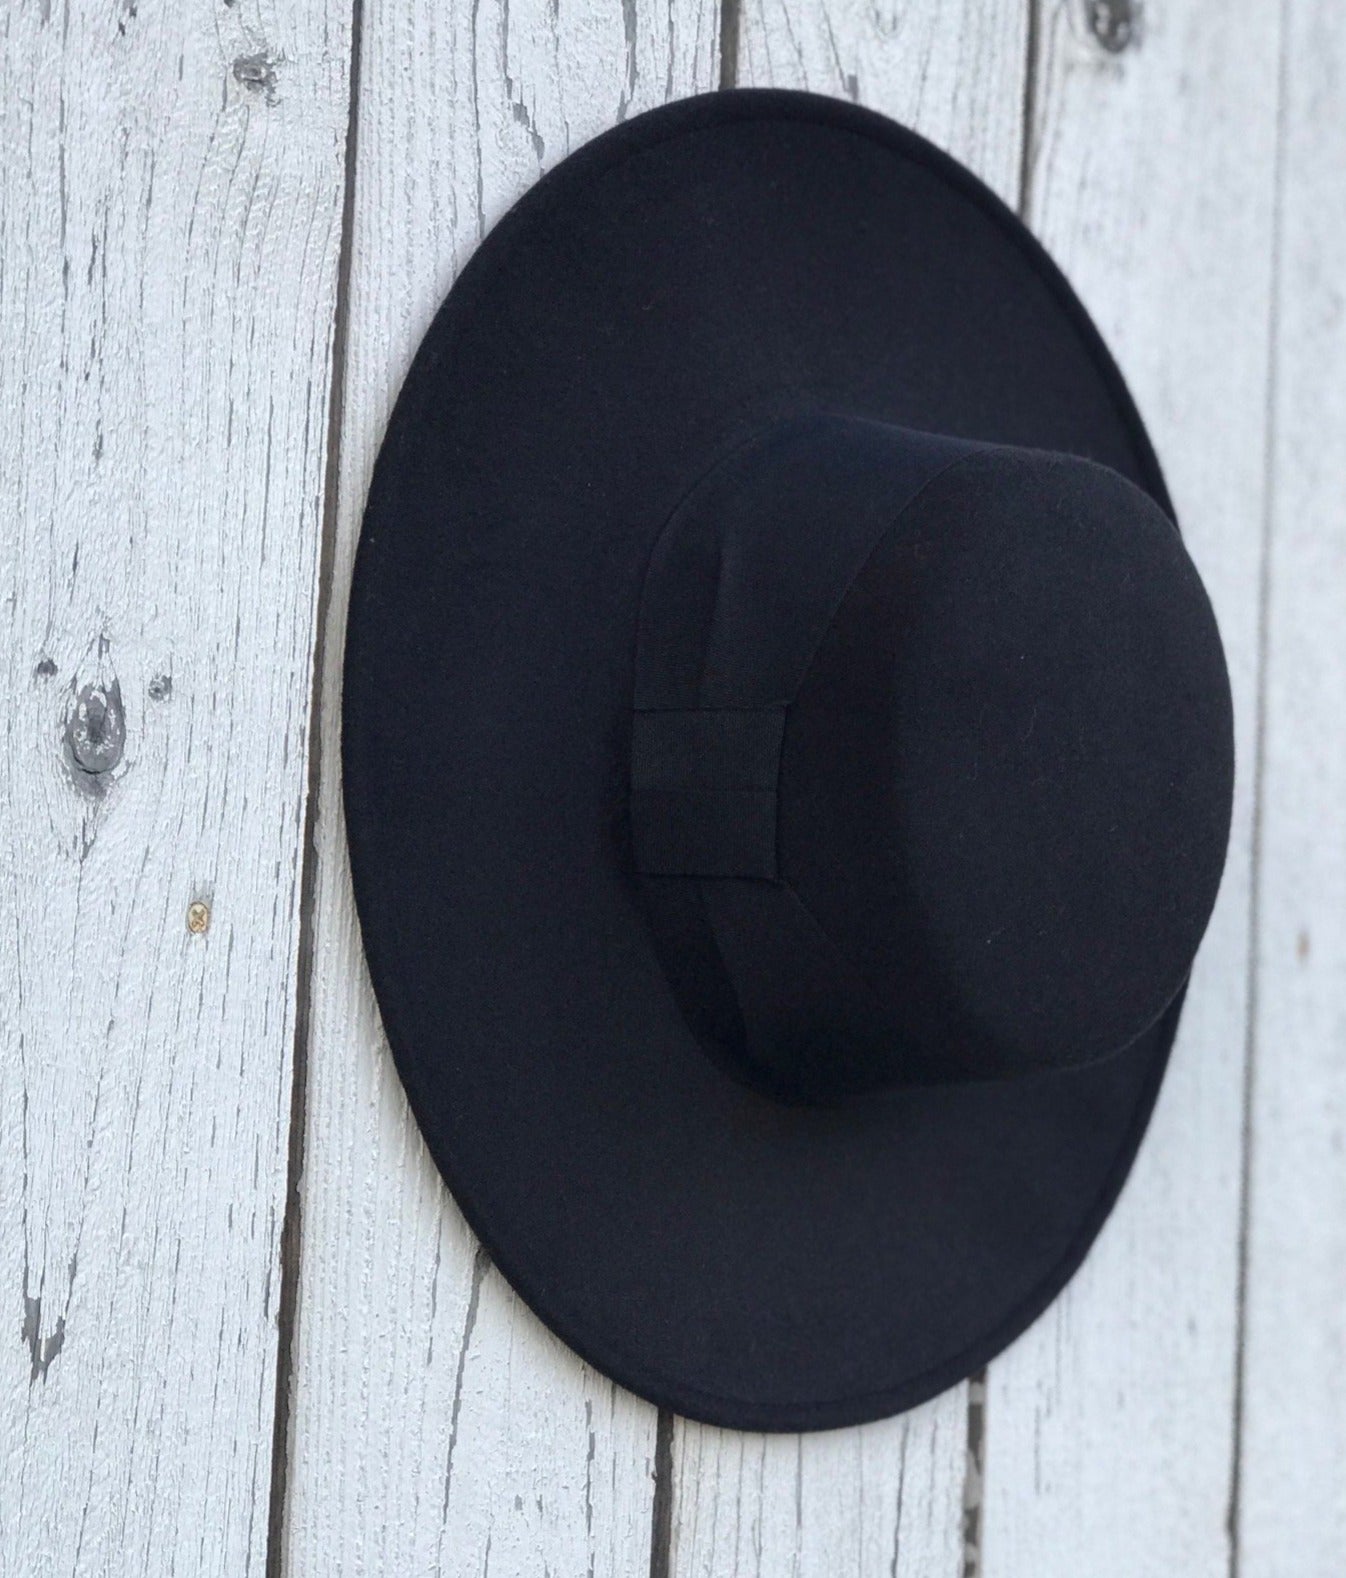 The Black Willow Hat